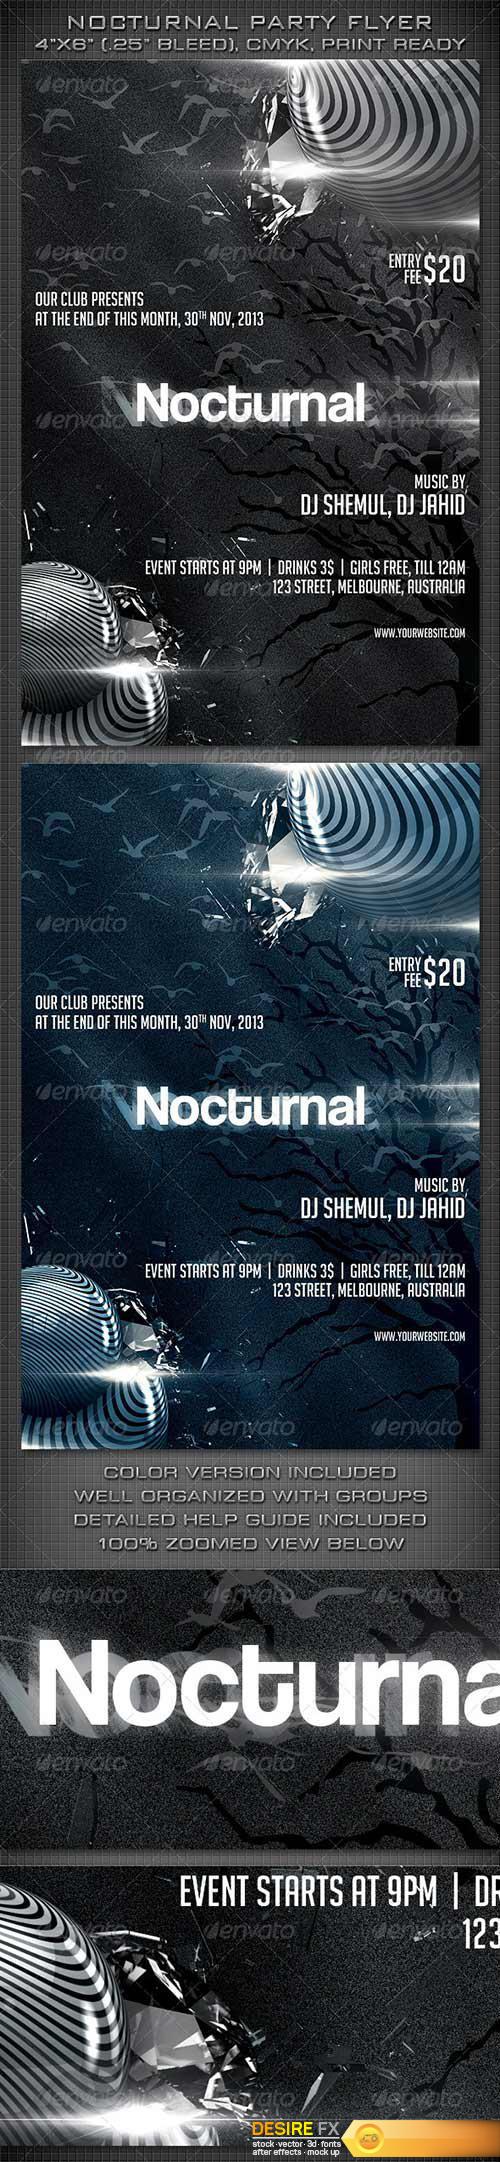 Graphicriver - Nocturnal Party Flyer 6045694